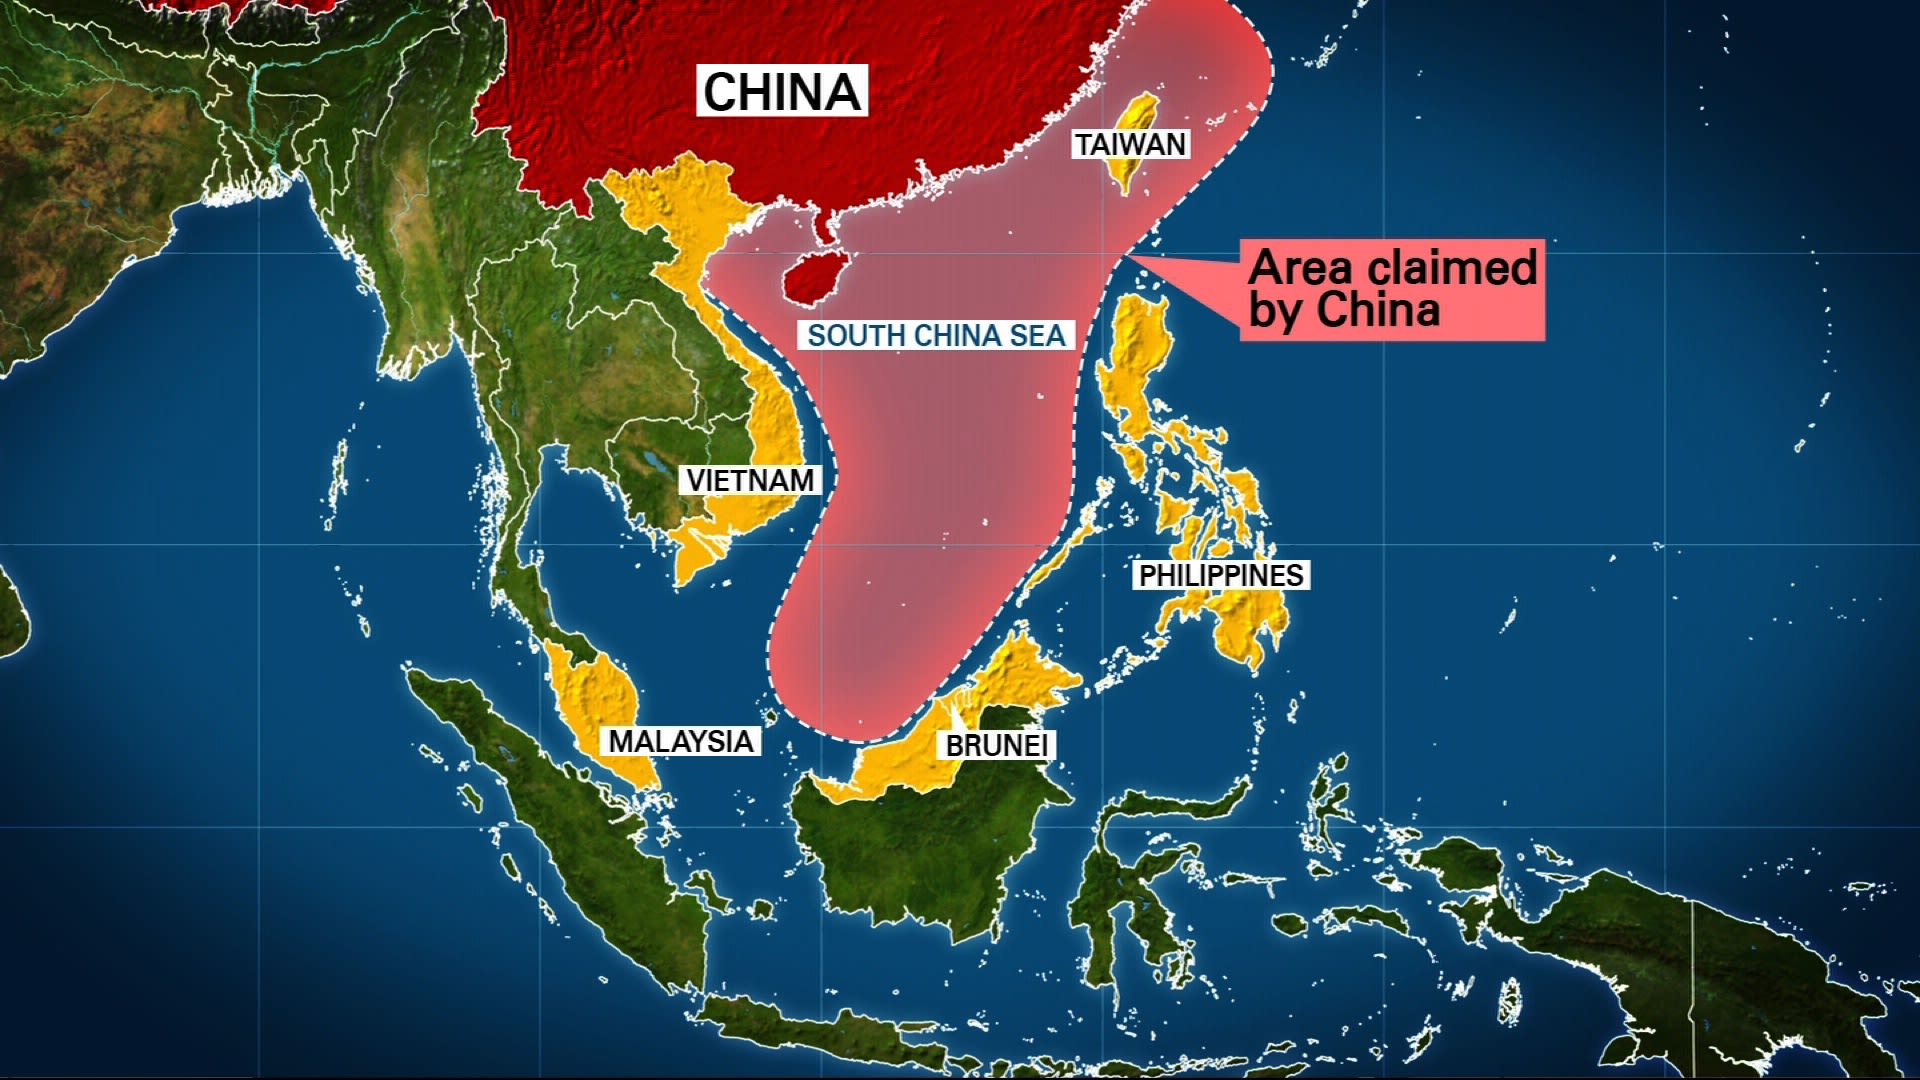 China's Claims Over the South China Sea